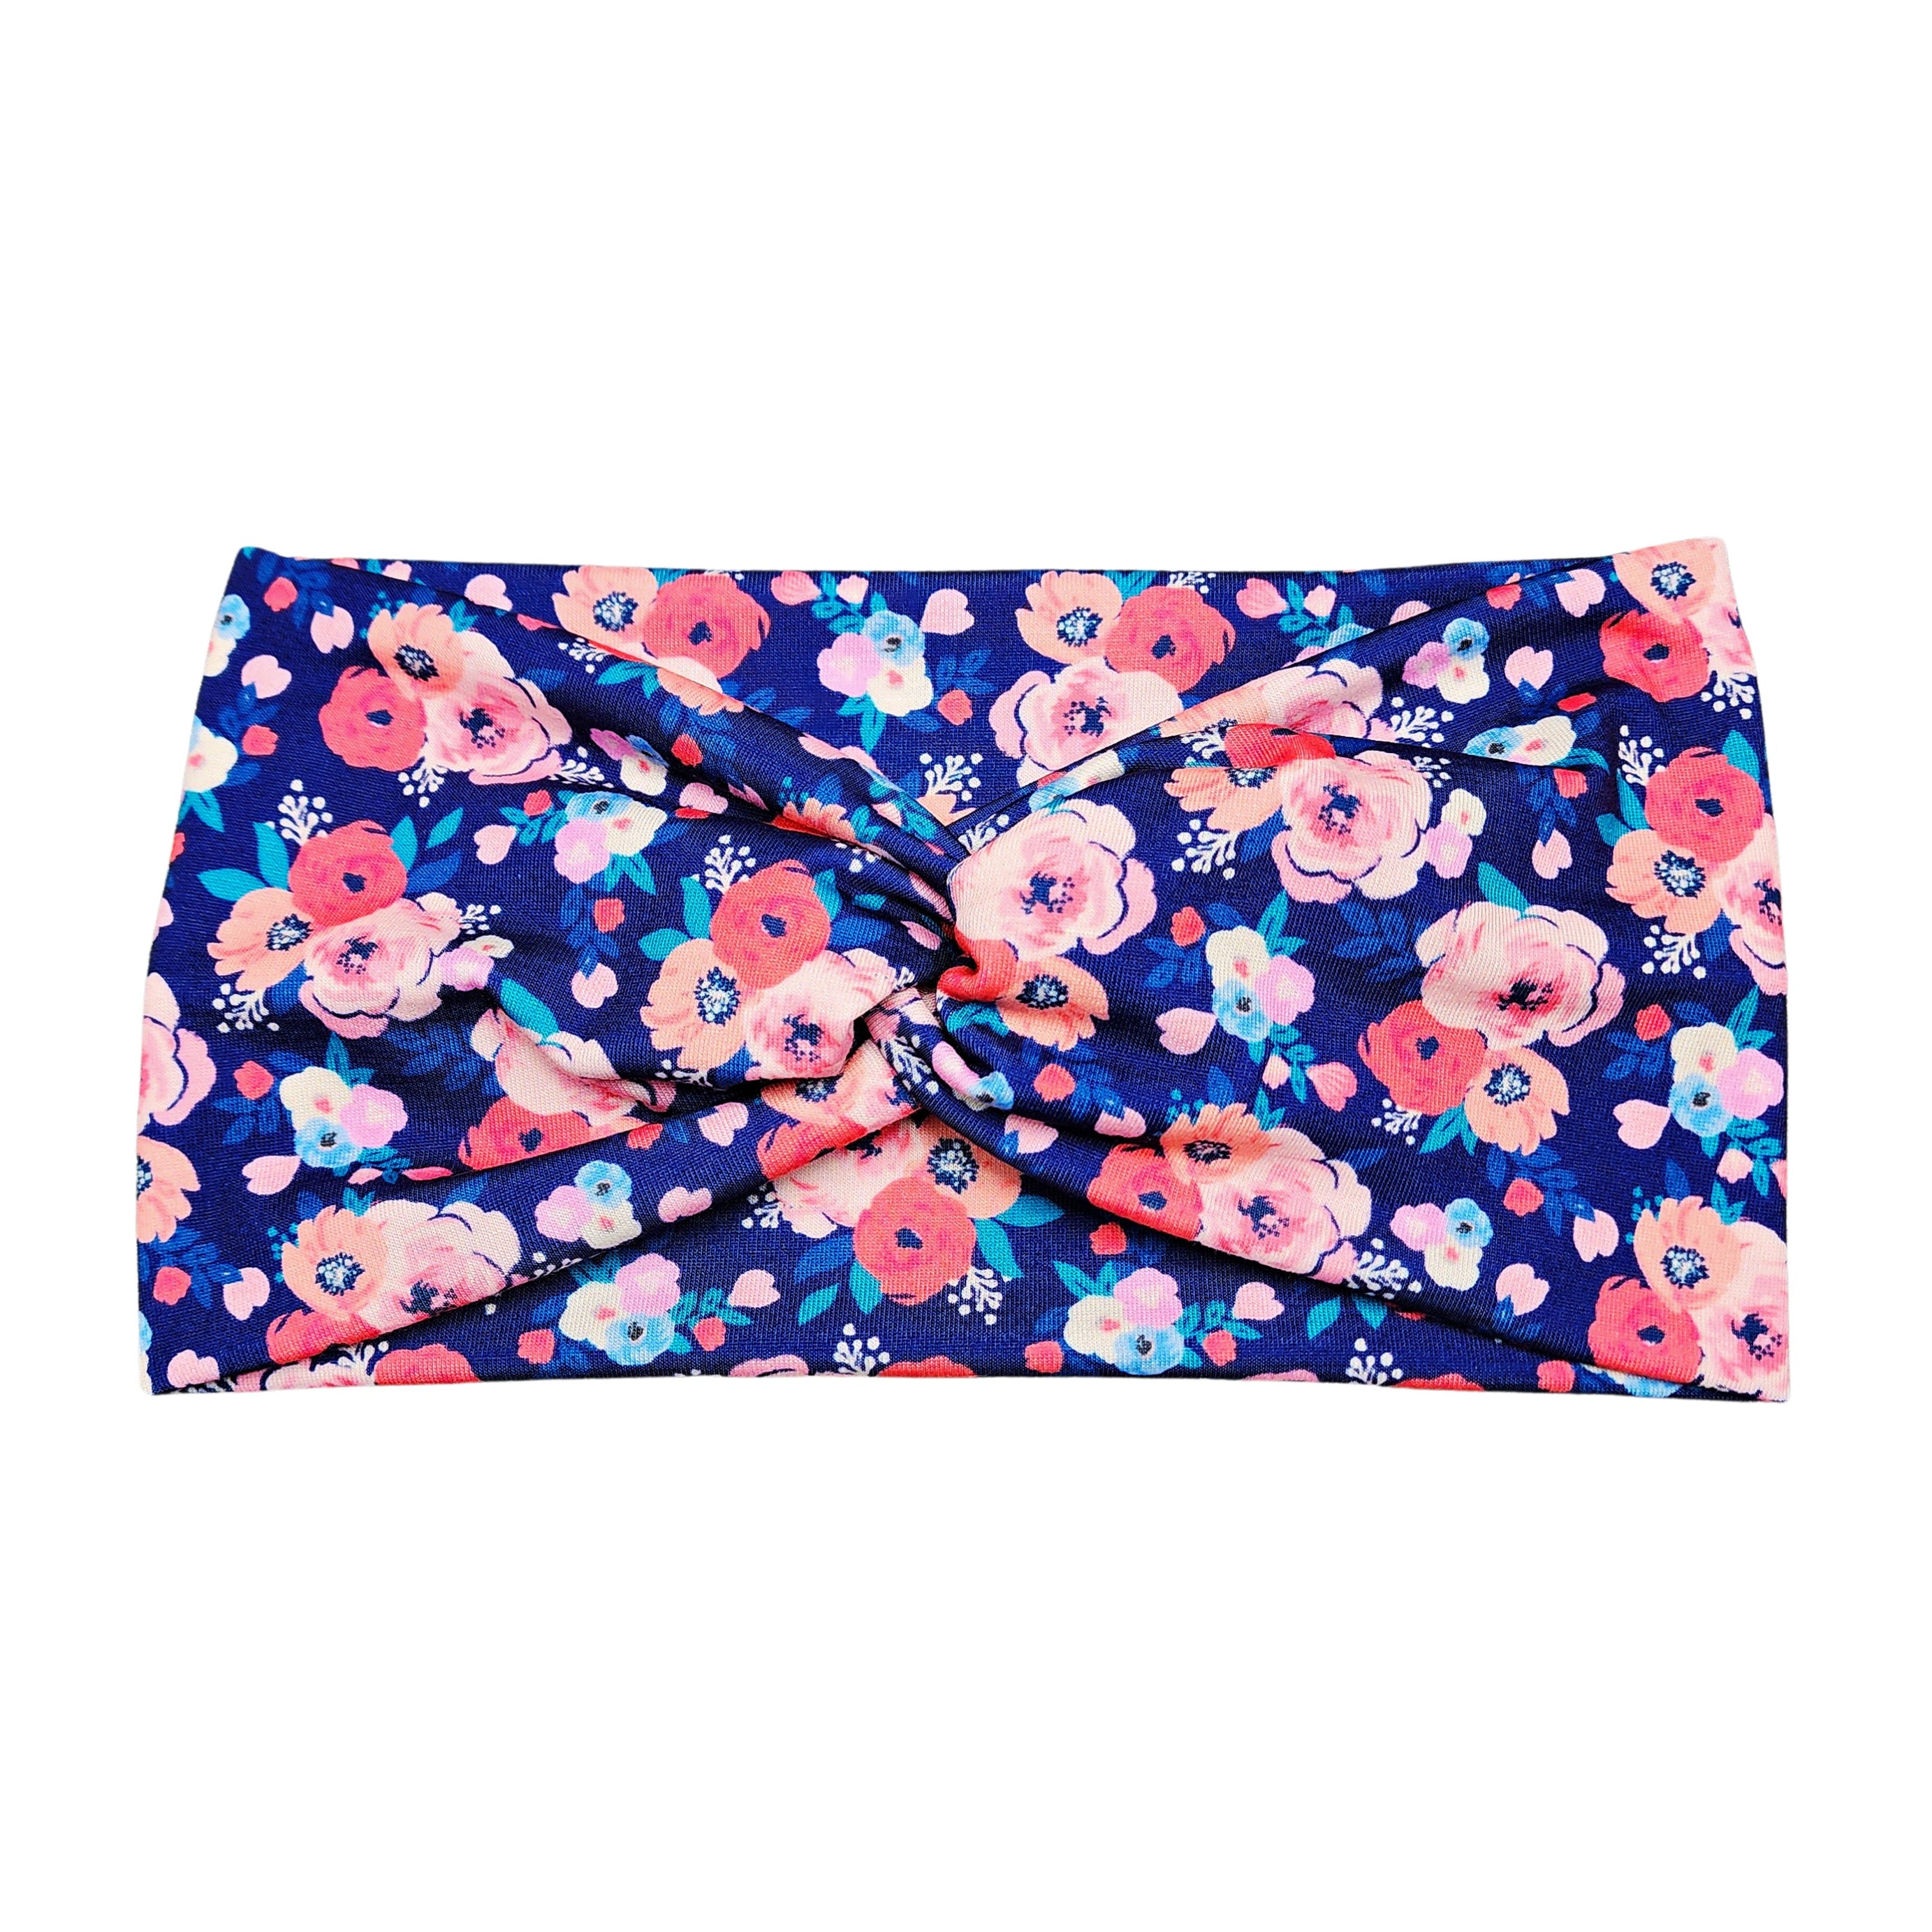 Wide Navy Blue and Coral Floral Headband for Women